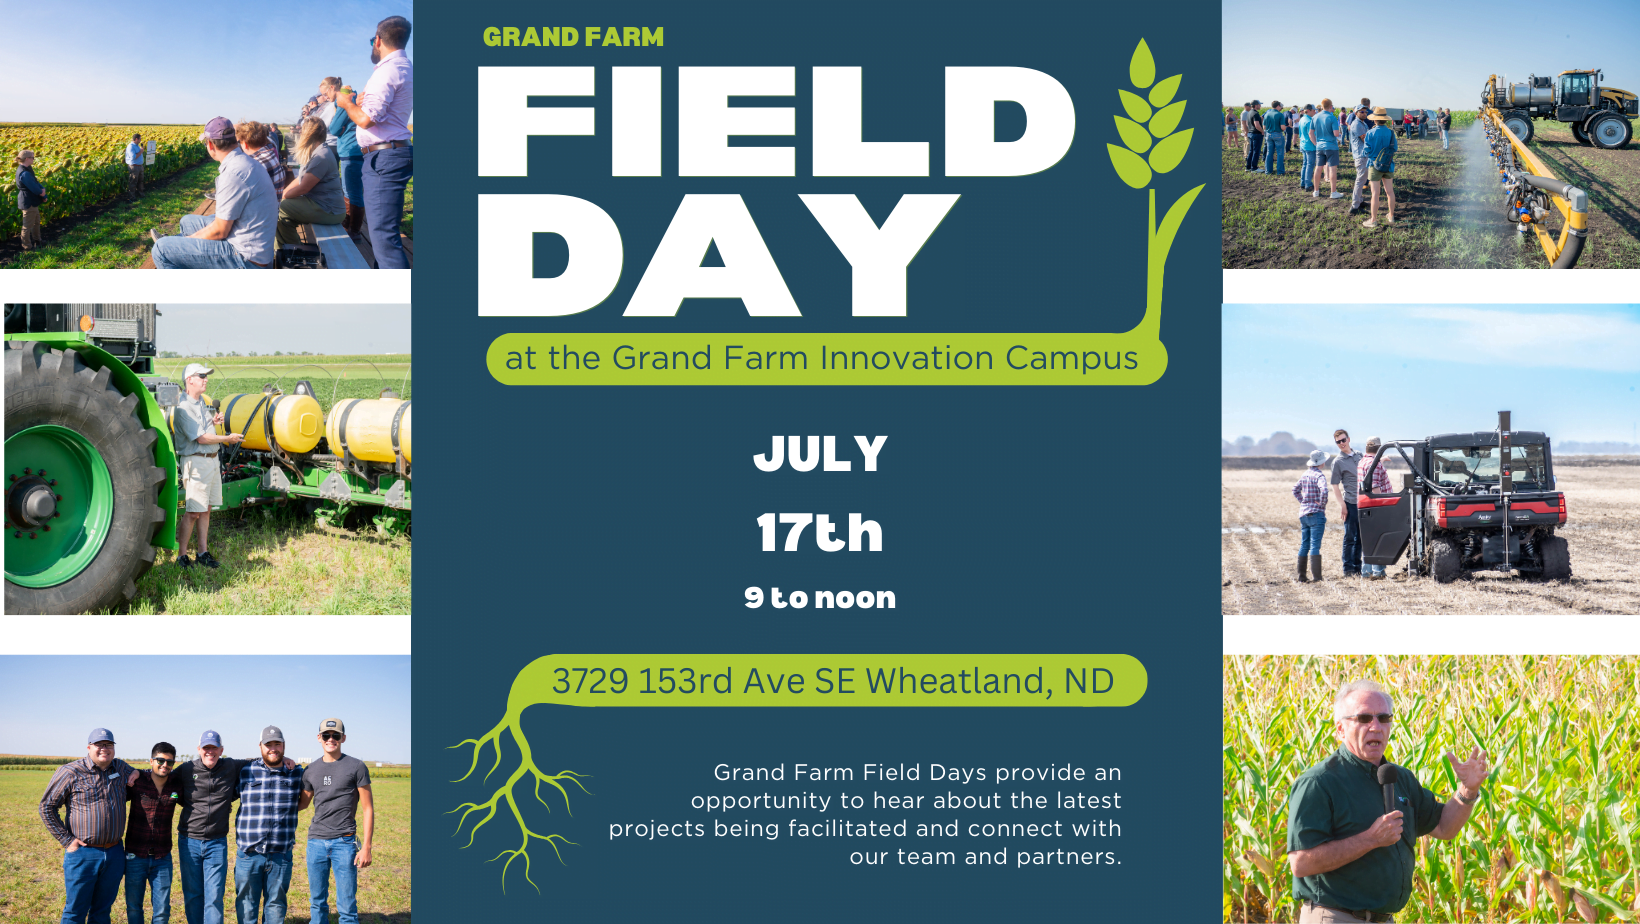 Field Day at the Grand Farm Innovation Campus on July 17th.